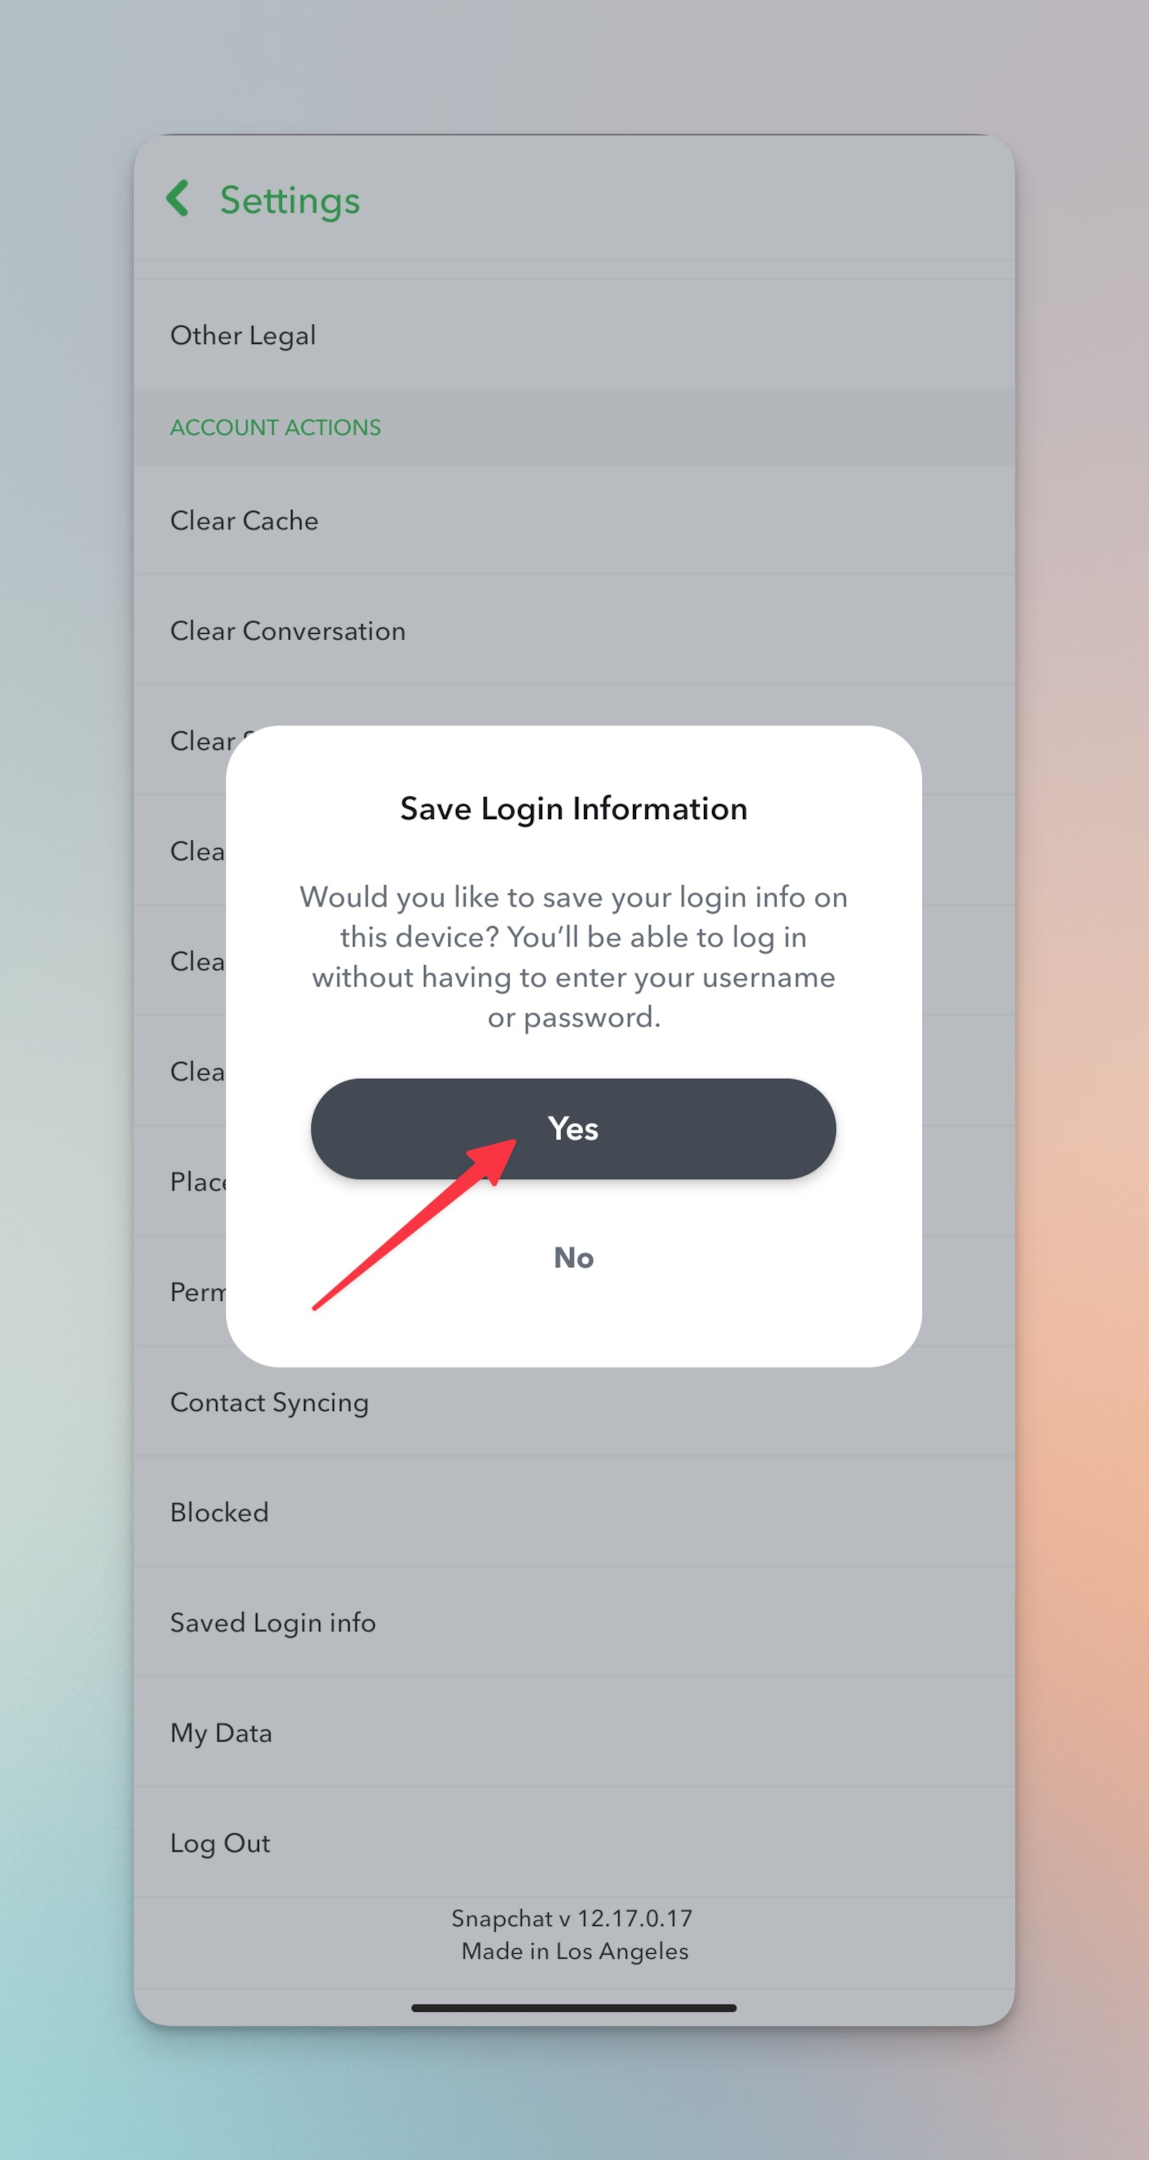 Remote.tools pointing to a yes button to save the login info (username and password) of existing snapchat account